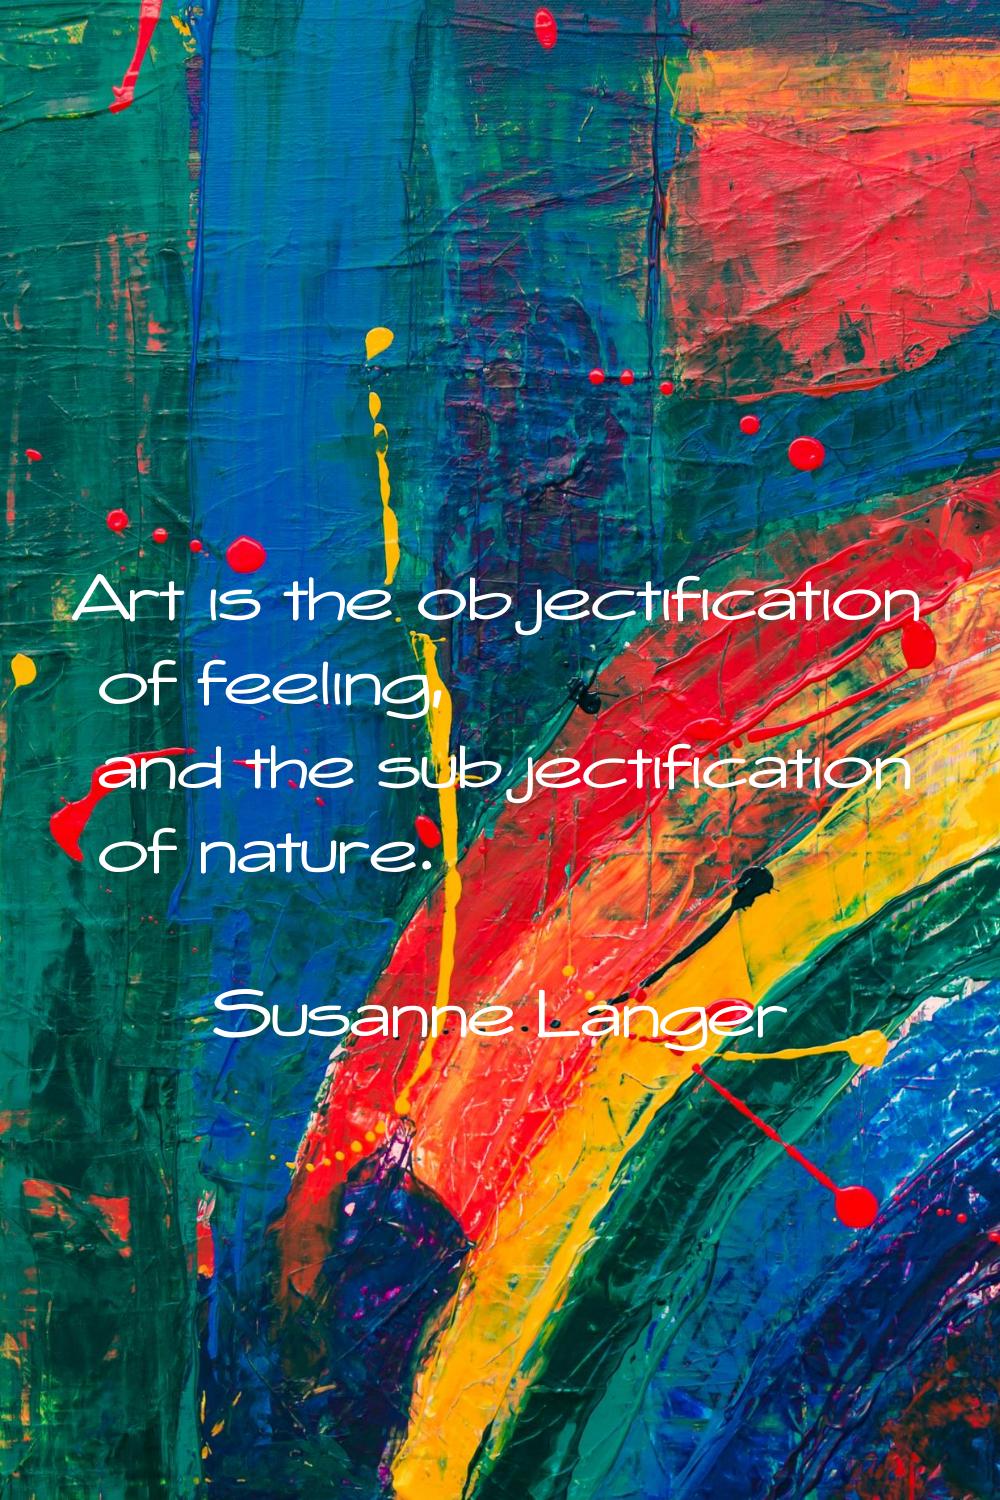 Art is the objectification of feeling, and the subjectification of nature.